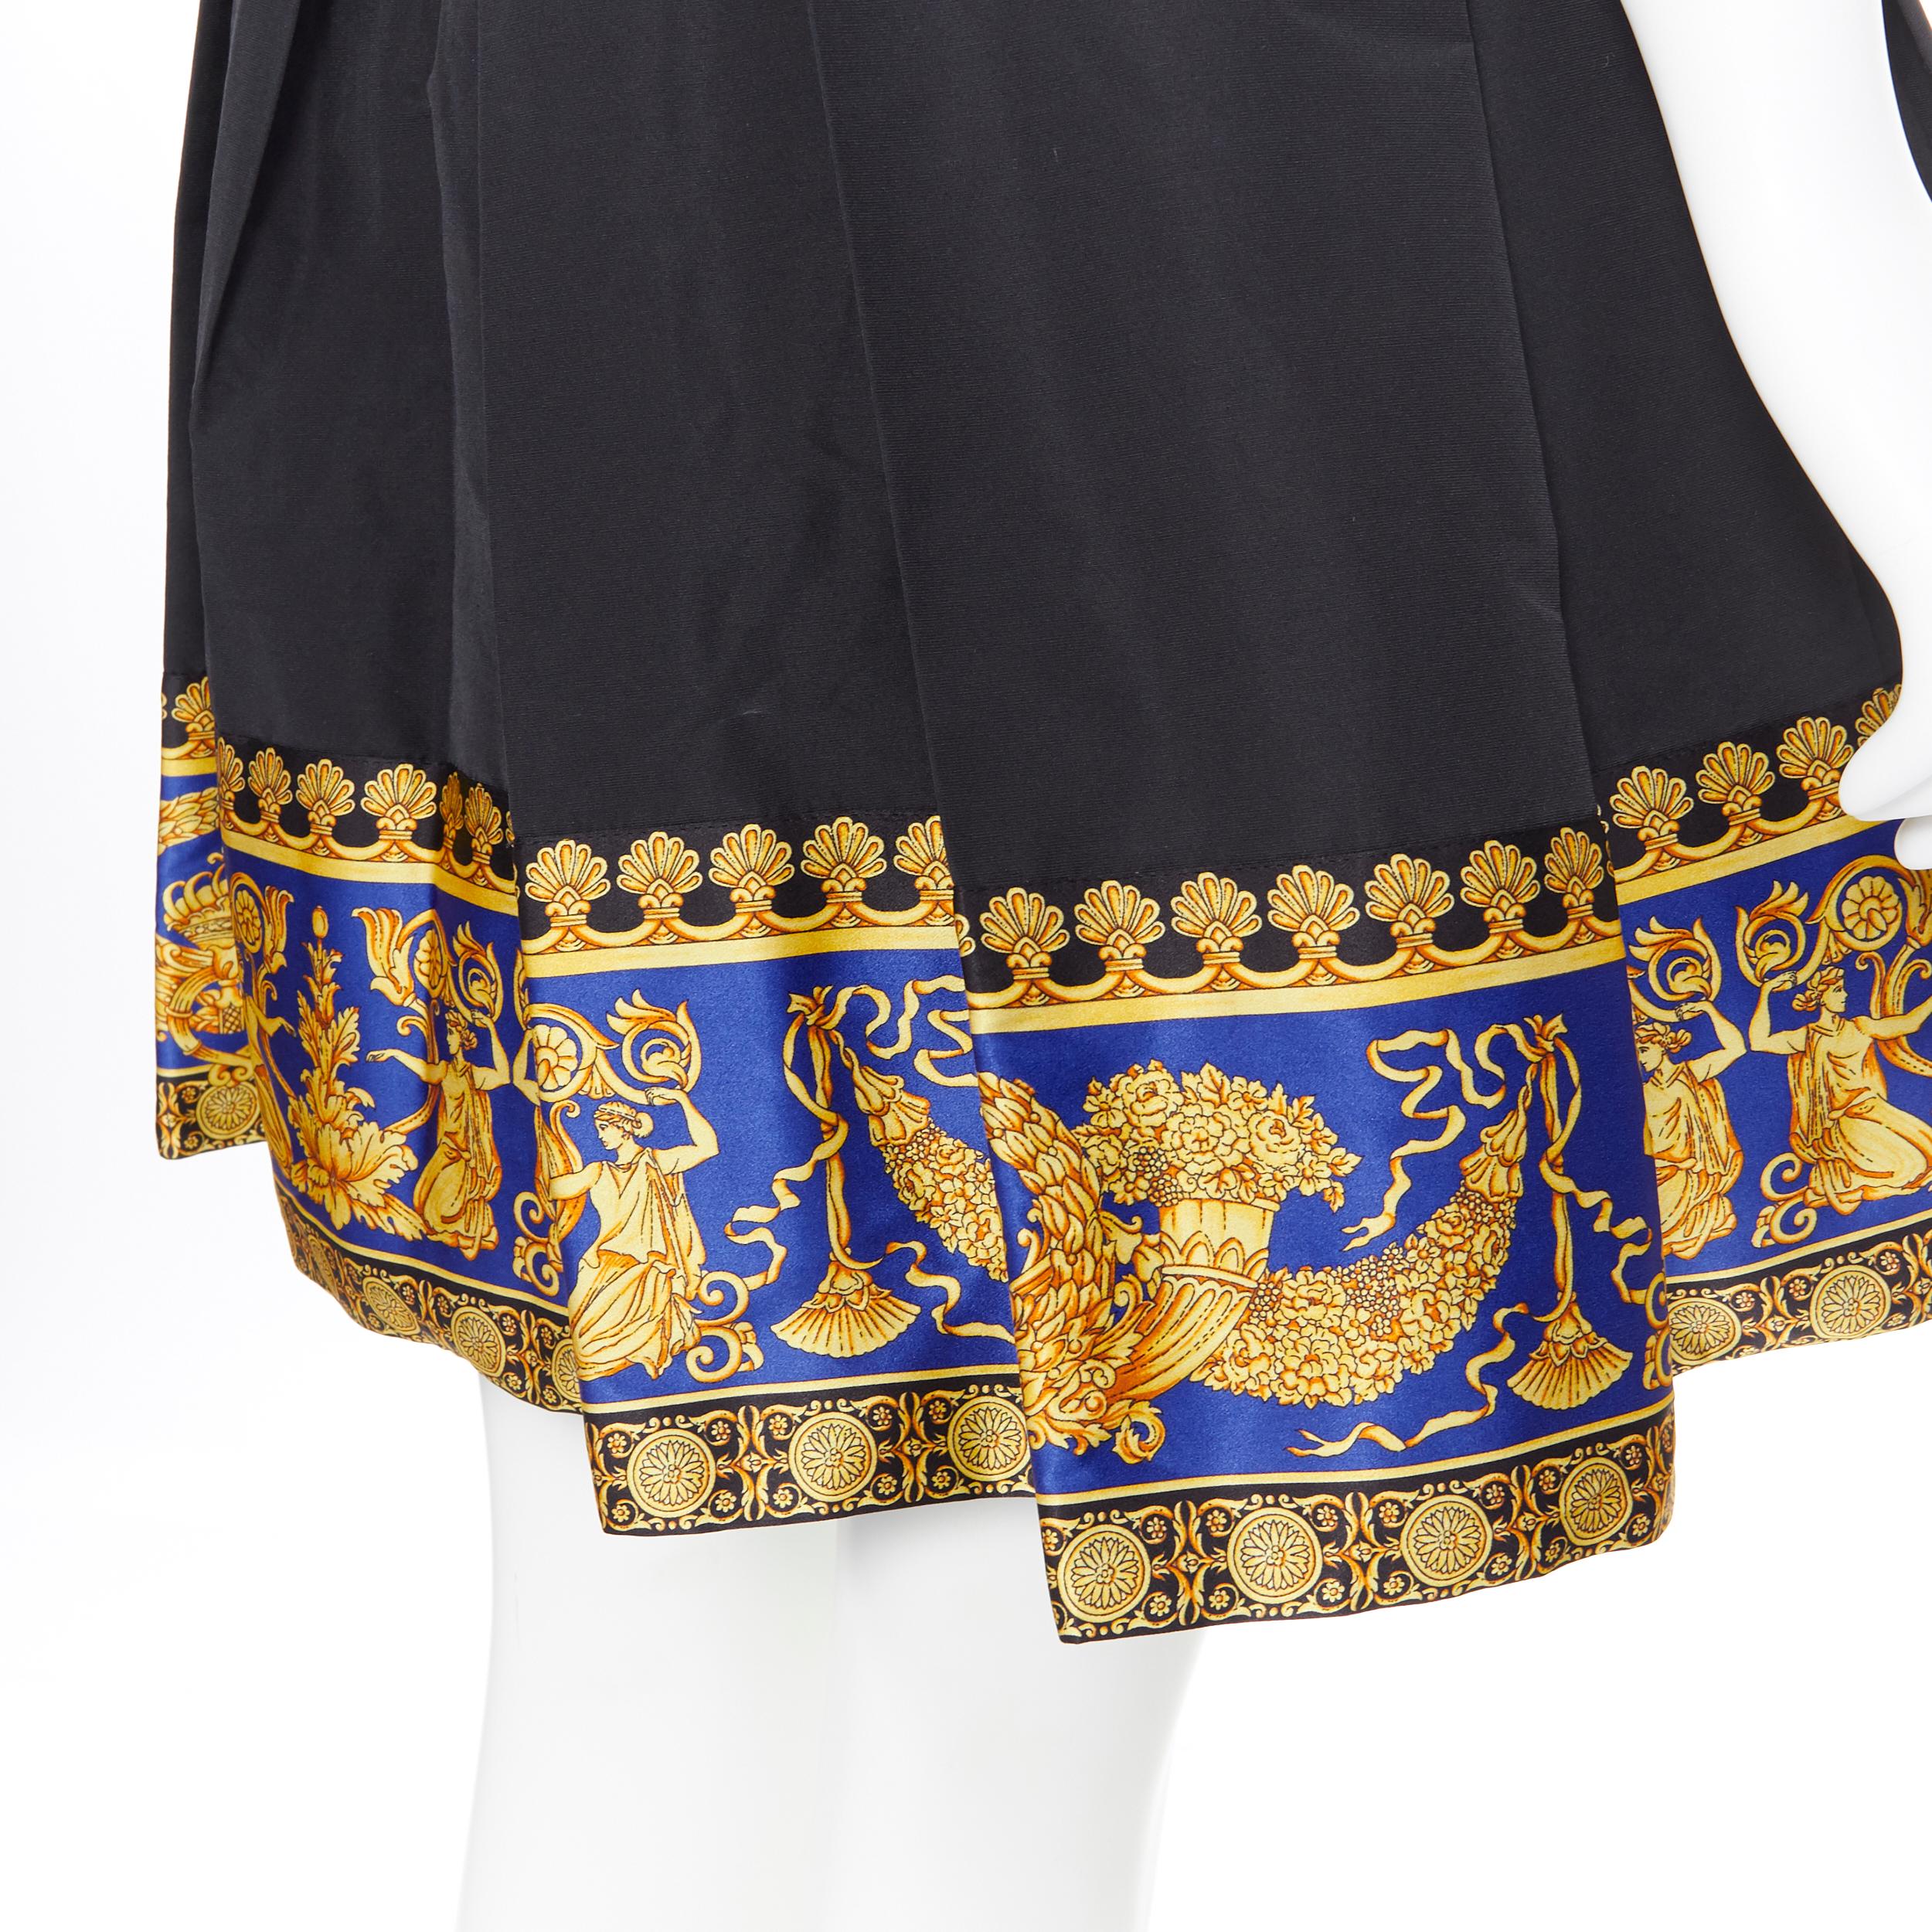 new VERSACE PF18 Runway black gold baroque flared skirt suspender dress IT40 
Reference: TGAS/A04330 
Brand: Versace 
Designer: Donatella Versace 
Collection: Pre Fall 2018 Runway 
Material: Polyester 
Color: Black 
Pattern: Floral 
Closure: Zip